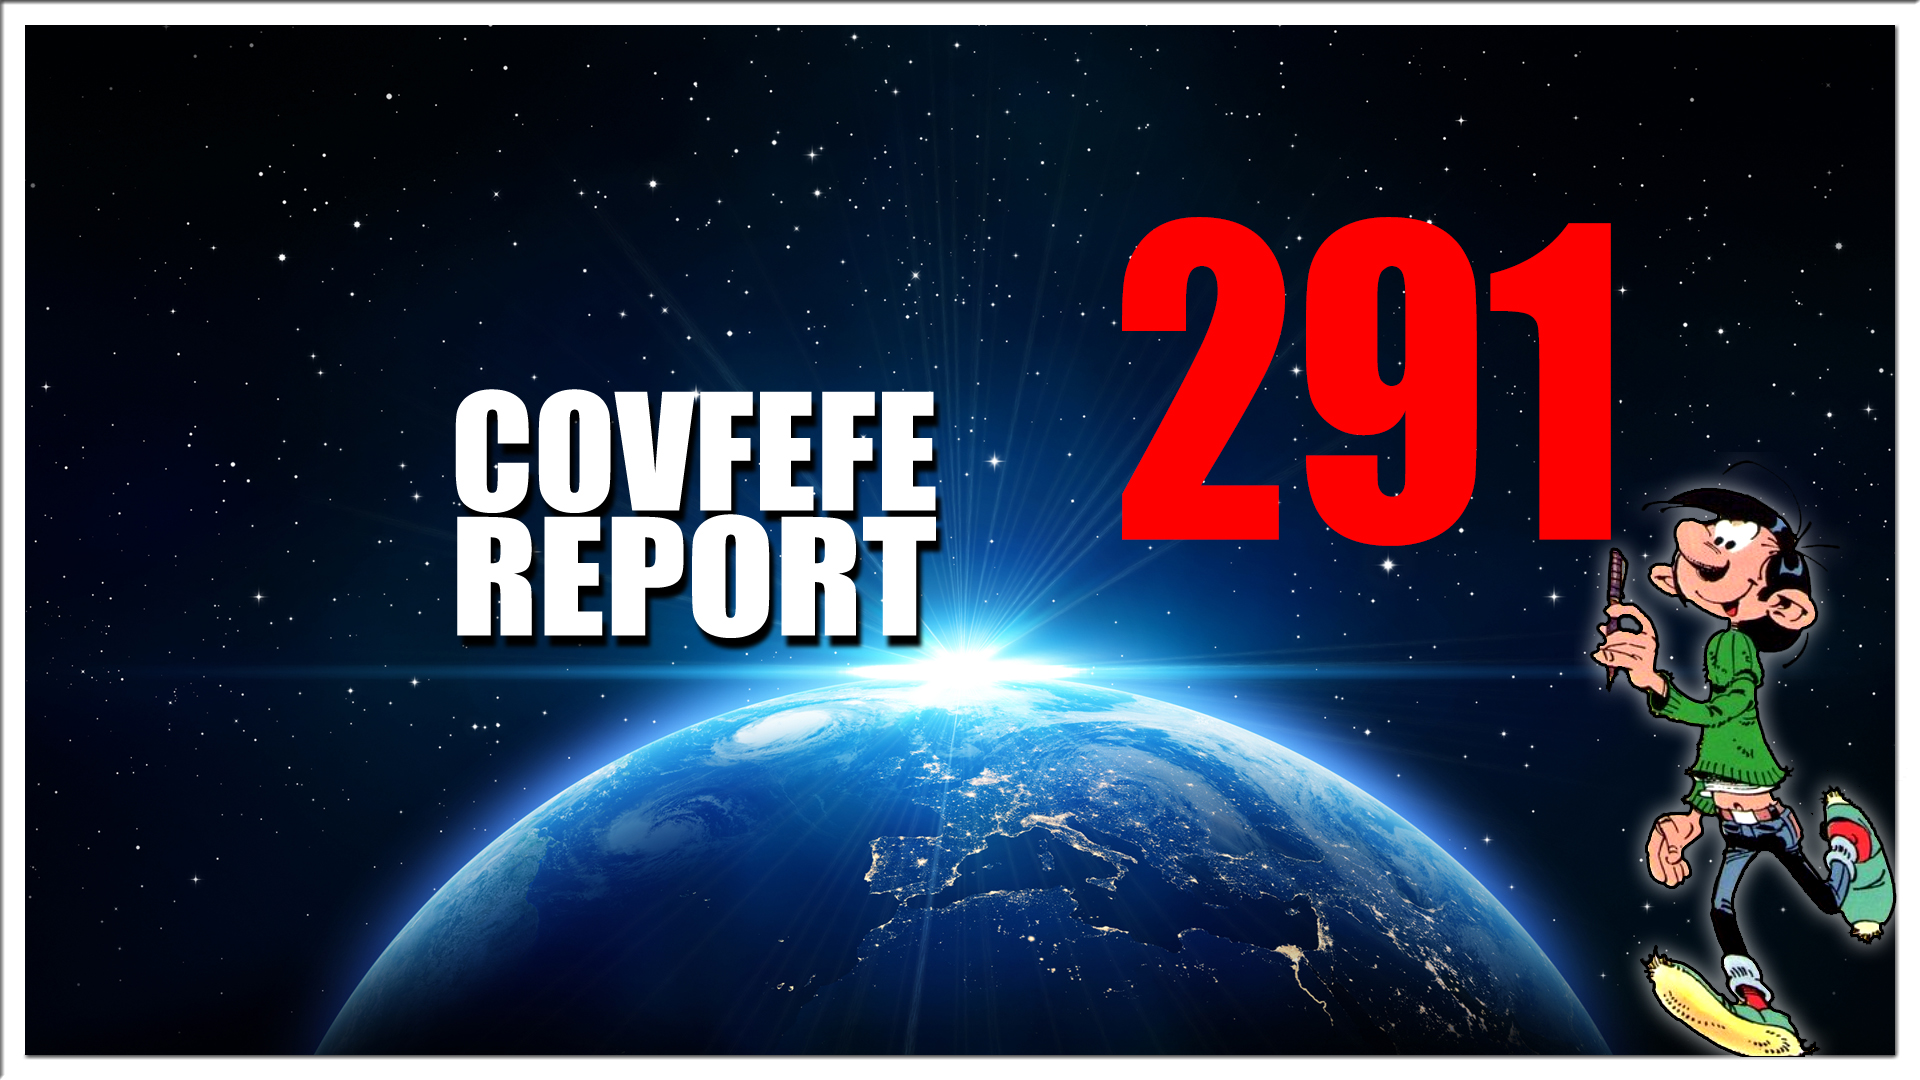 Covfefe Report 291. Rig for red, Soros, PCR-Gate, Watten-staaf Locked & Load, GoedLicht